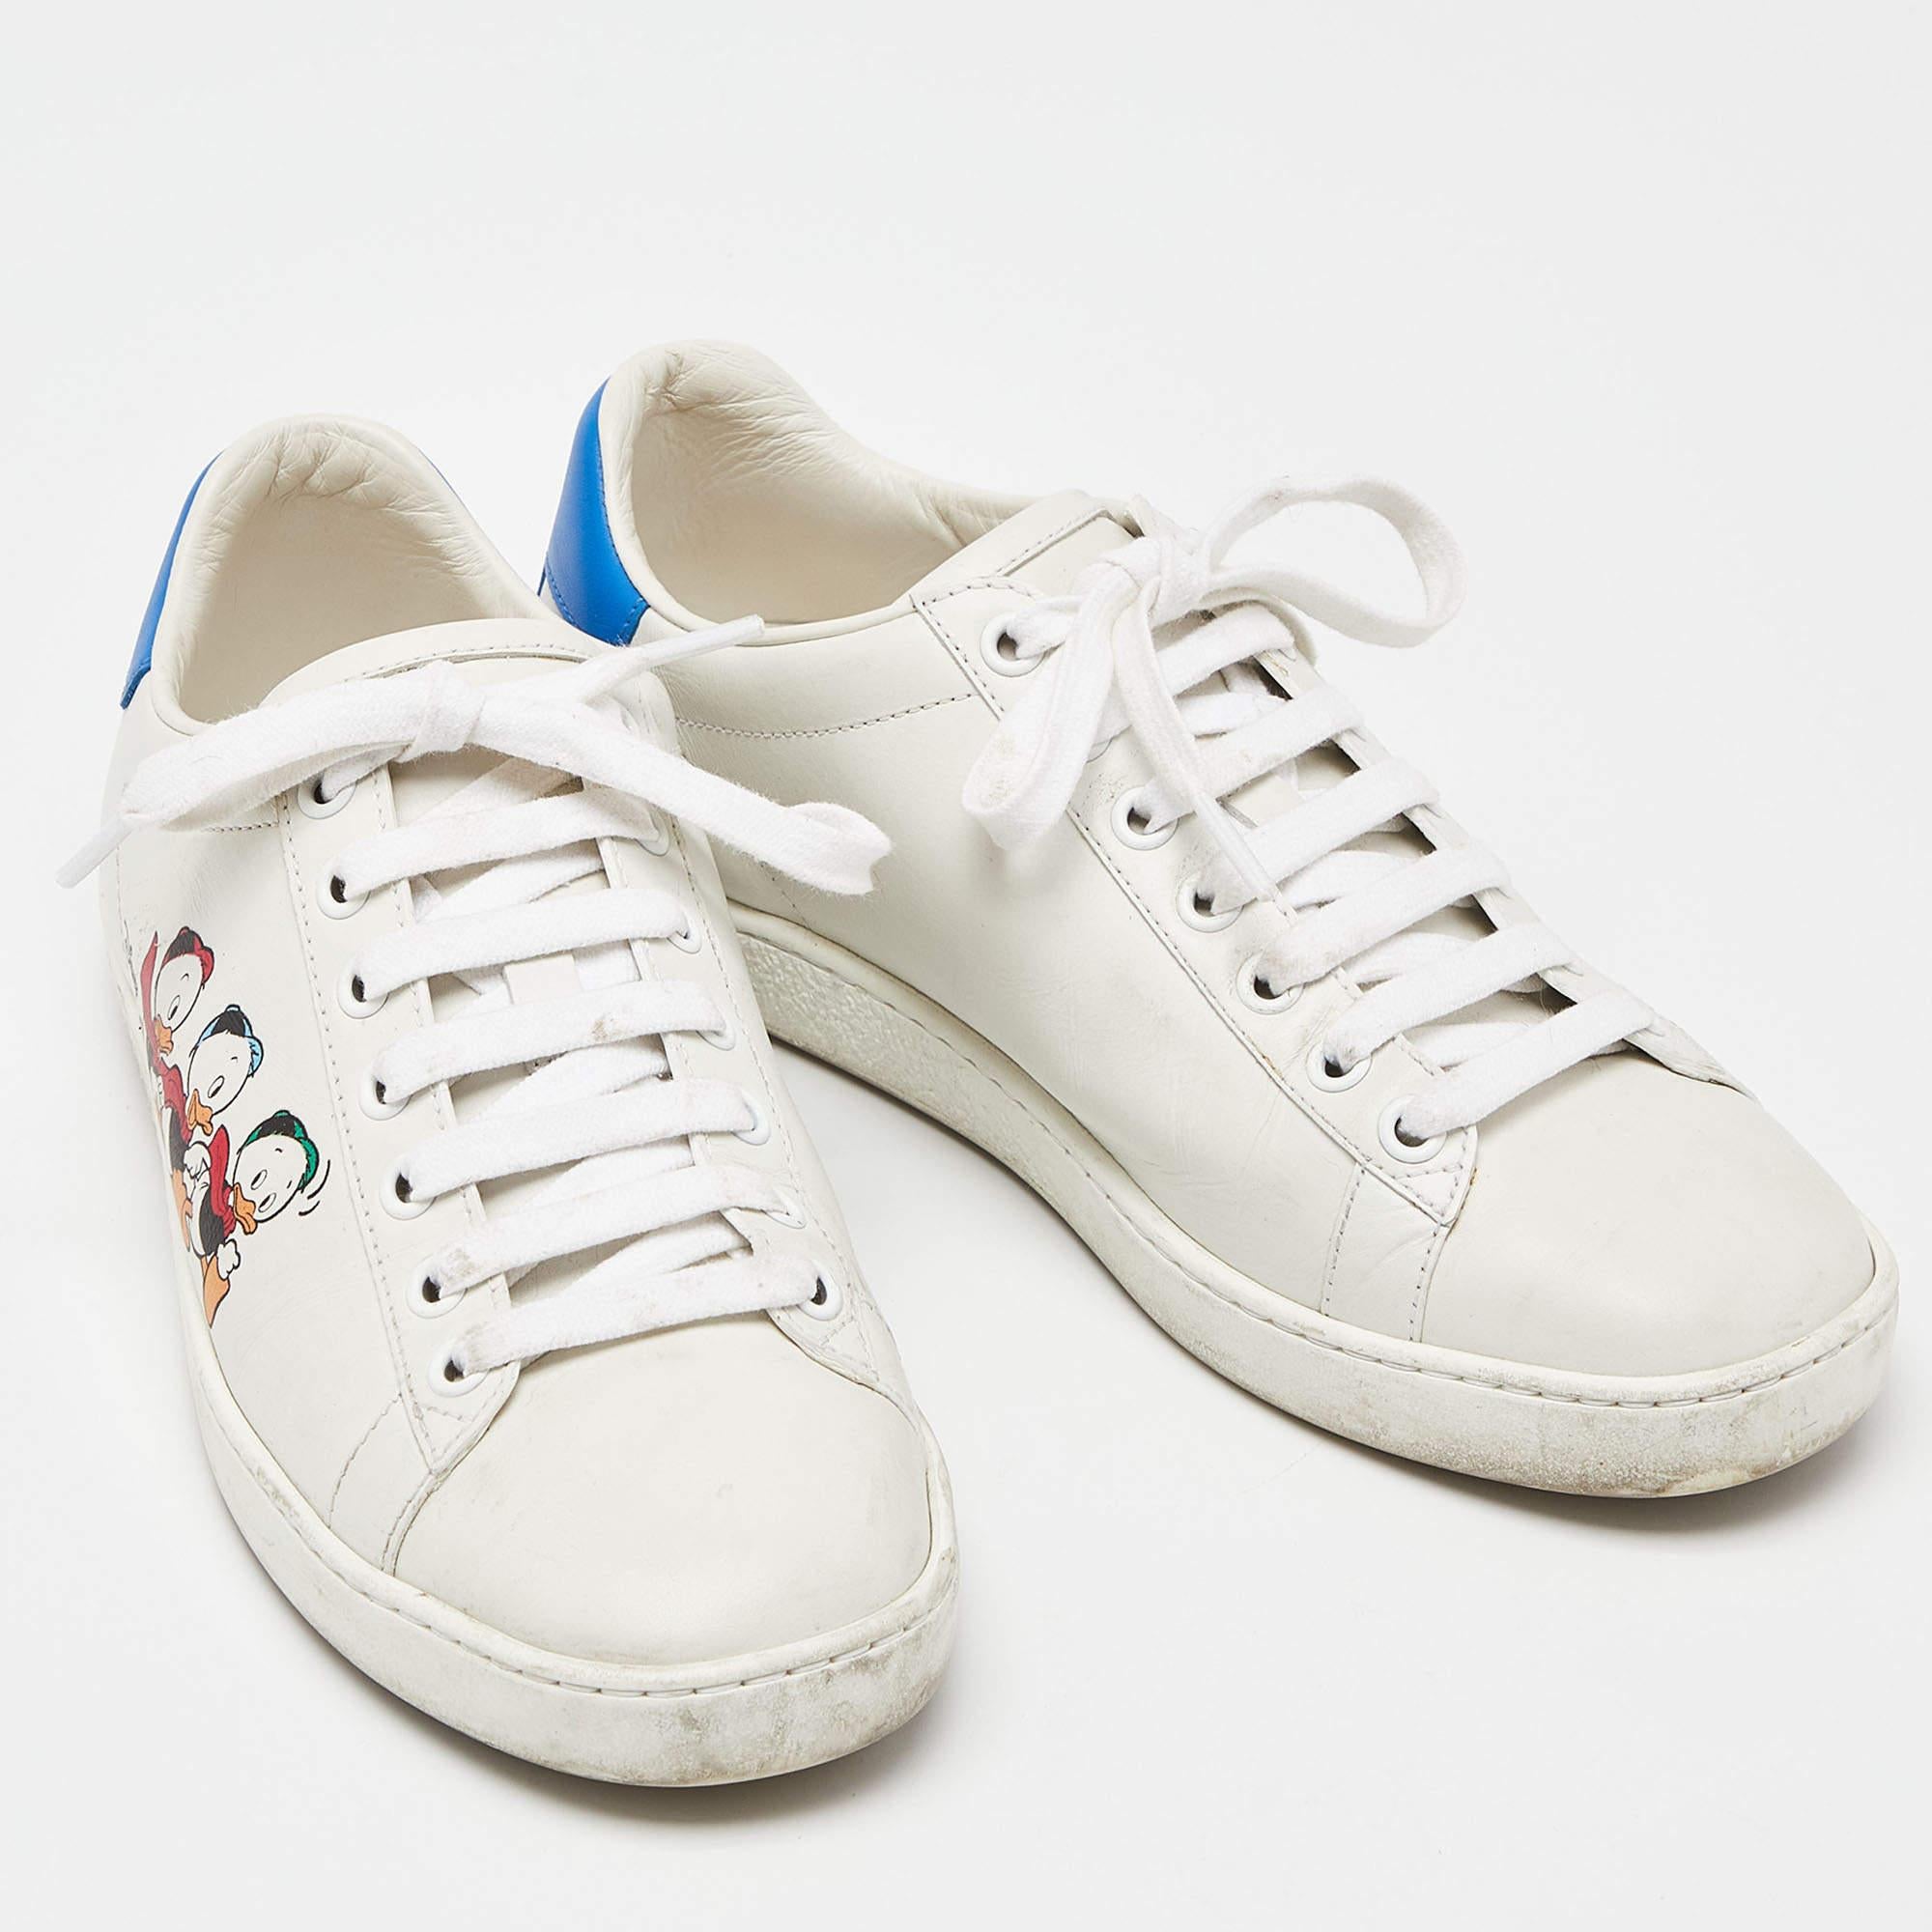 Gucci x Disney White/Blue Leather Huey, Dewey and Louie Ace Sneakers Size 36 For Sale 4